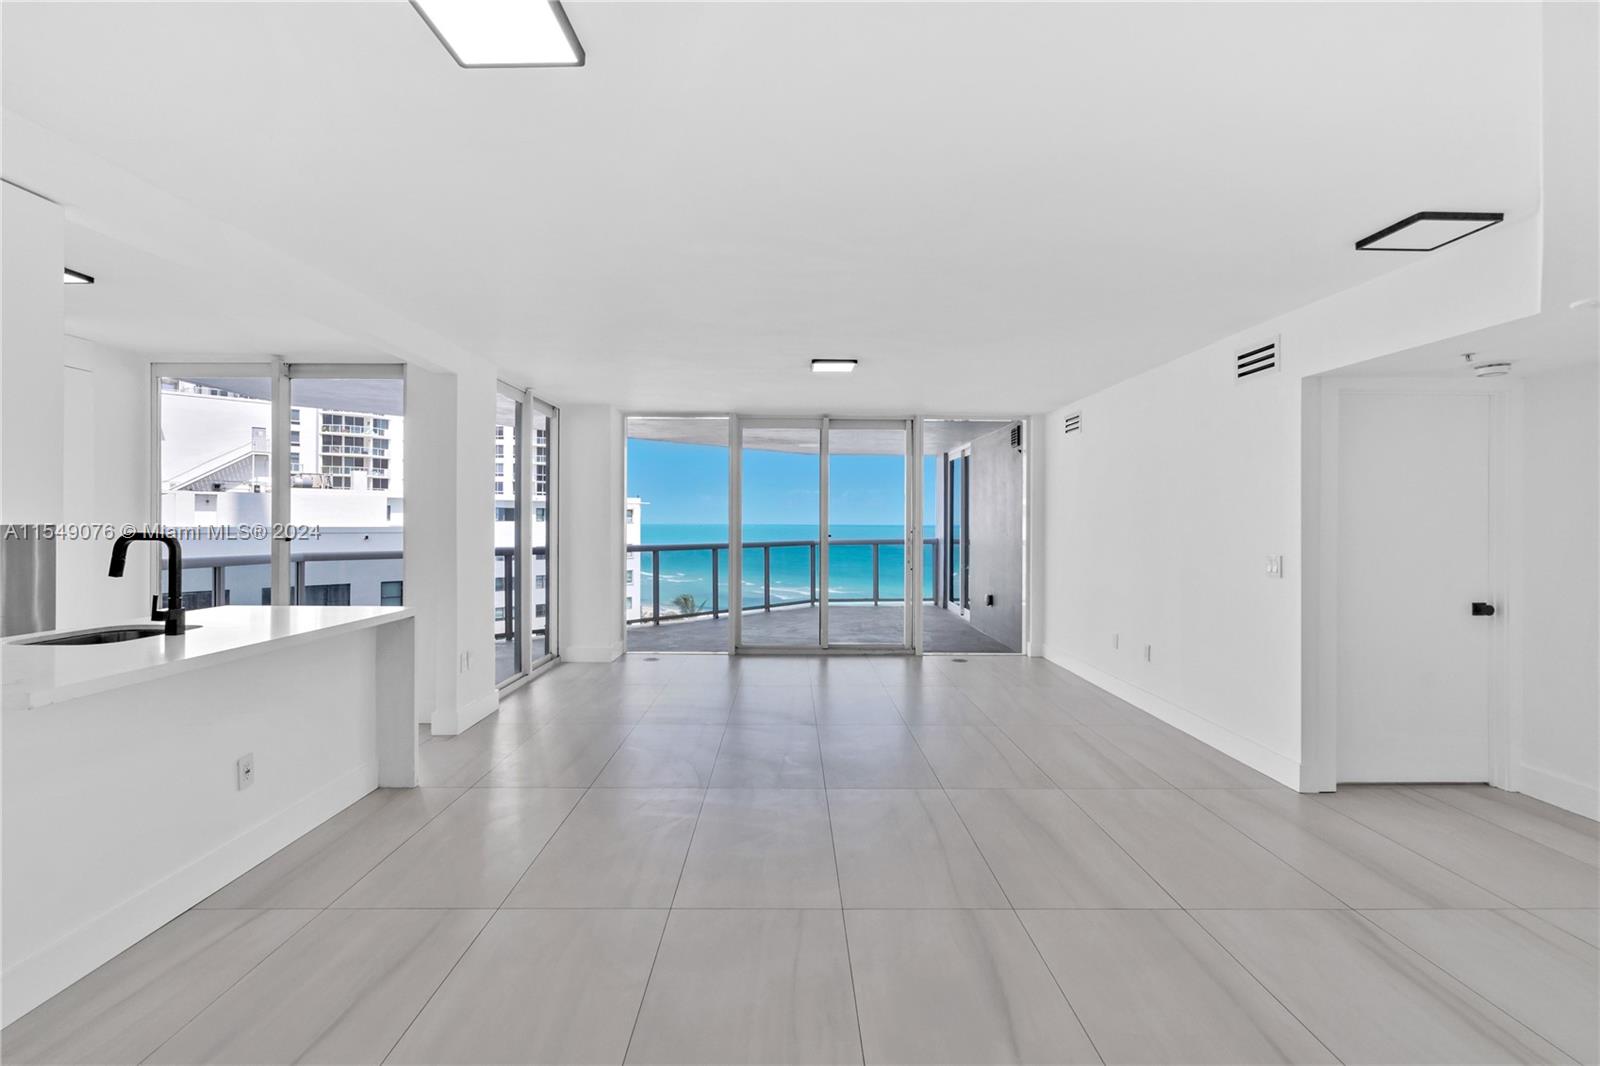 Embrace the epitome of coastal living with this immaculate 2-bedroom, 2-bathroom condo in the heart of Miami Beach. Impeccably renovated from top to bottom, everything is new, including appliances.  It offers a bright and airy ambiance that perfectly complements the stunning beachfront views. Start your mornings with sunrise yoga sessions on the pristine sands, or opt for a
leisurely walk or bike ride along the boardwalk right at your doorstep. Located in Mid-Miami Beach, you're close to everything the city has to offer, from world-class dining to nightlife in an easy-going residential neighborhood. With beach service daily, and a concierge 24 hrs, every day feels like a vacation in this new condo.  All Special assessments are paid by the seller.  1 garage and 1
storage unit.